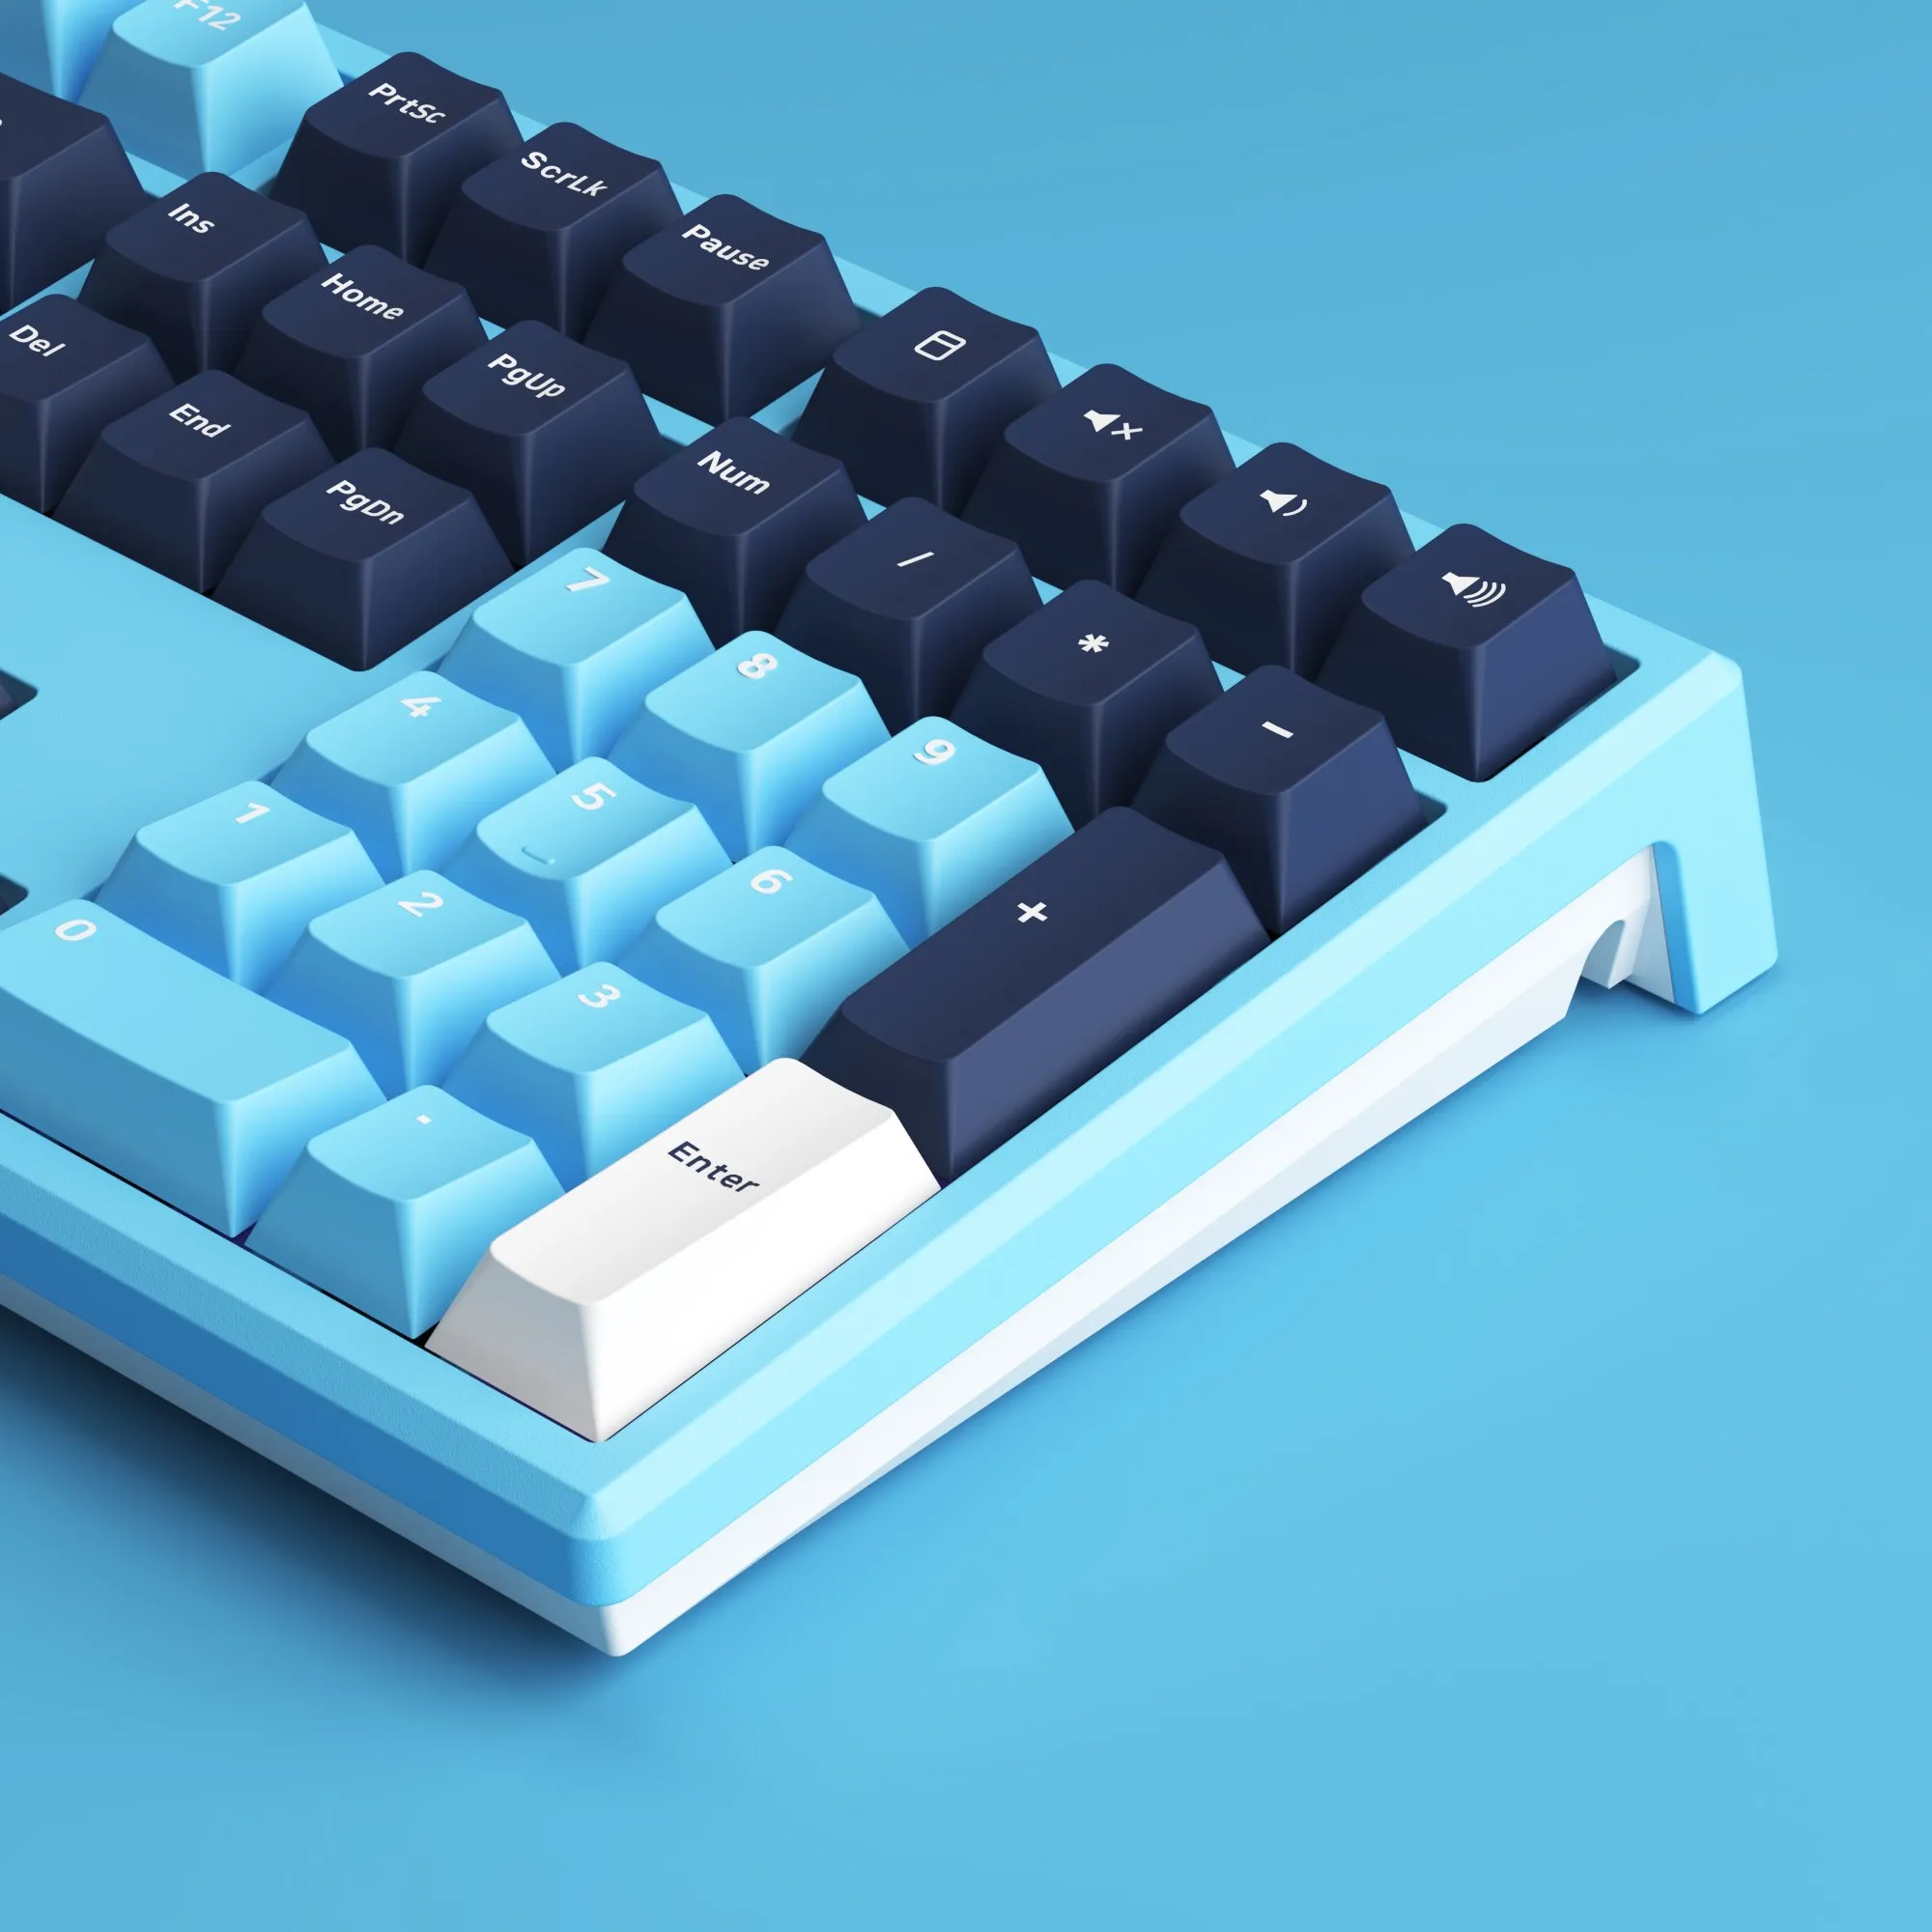 Introducing the GMK+ Mirror of the Sky OEM Custom Keycap Set—an exquisite blend of functionality that transforms your keyboard into a masterpiece.